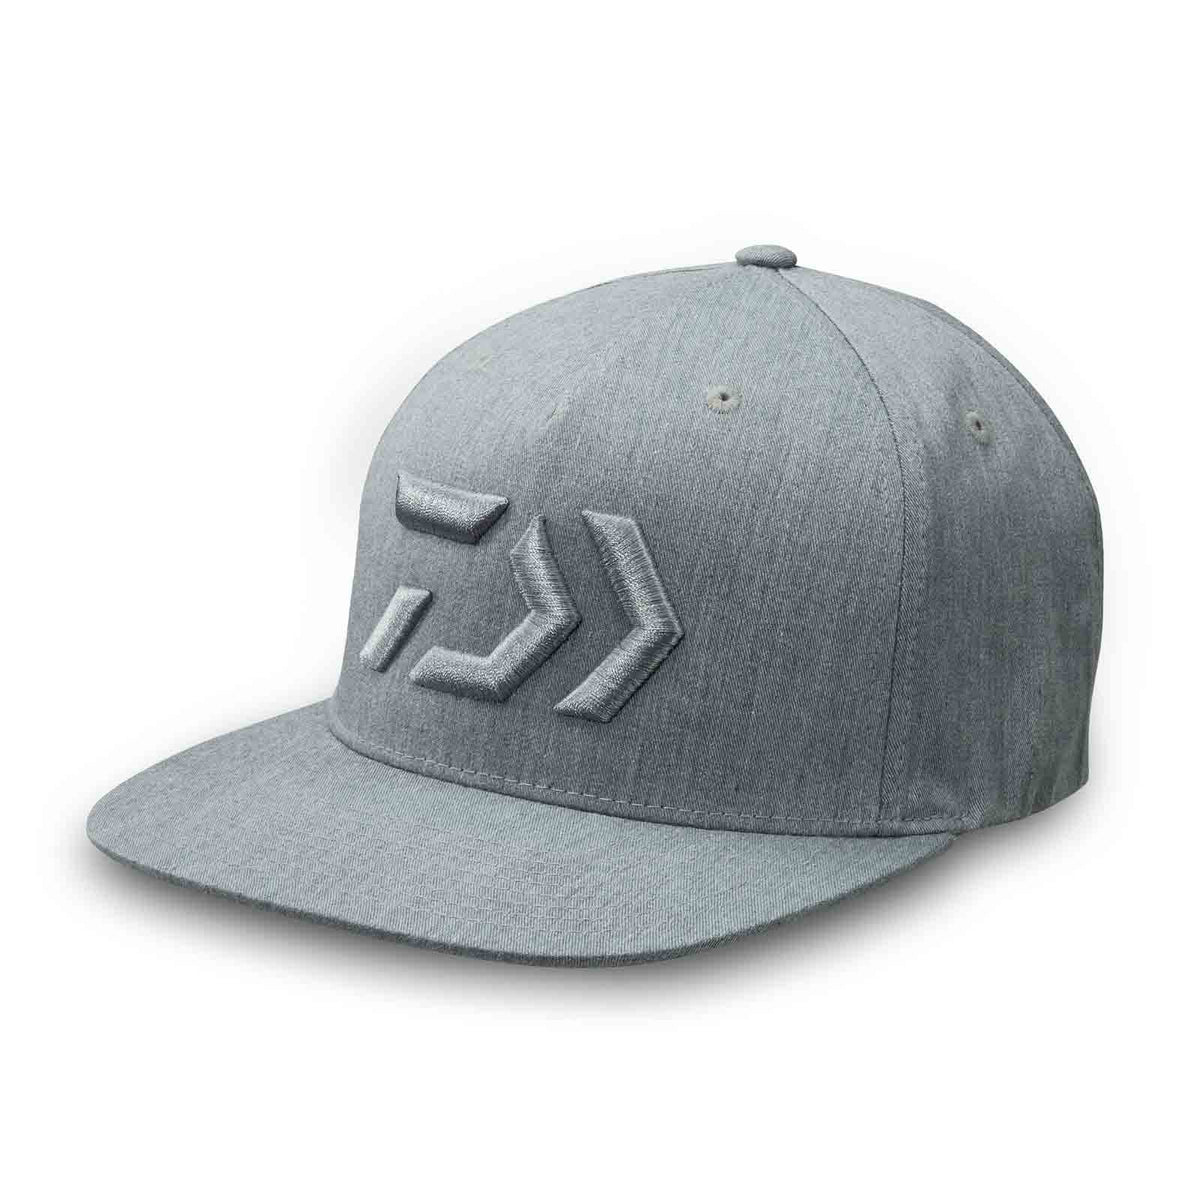 Daiwa D-VEC PINCH BILL WITH EMBROIDERED LOGO Grey Hats